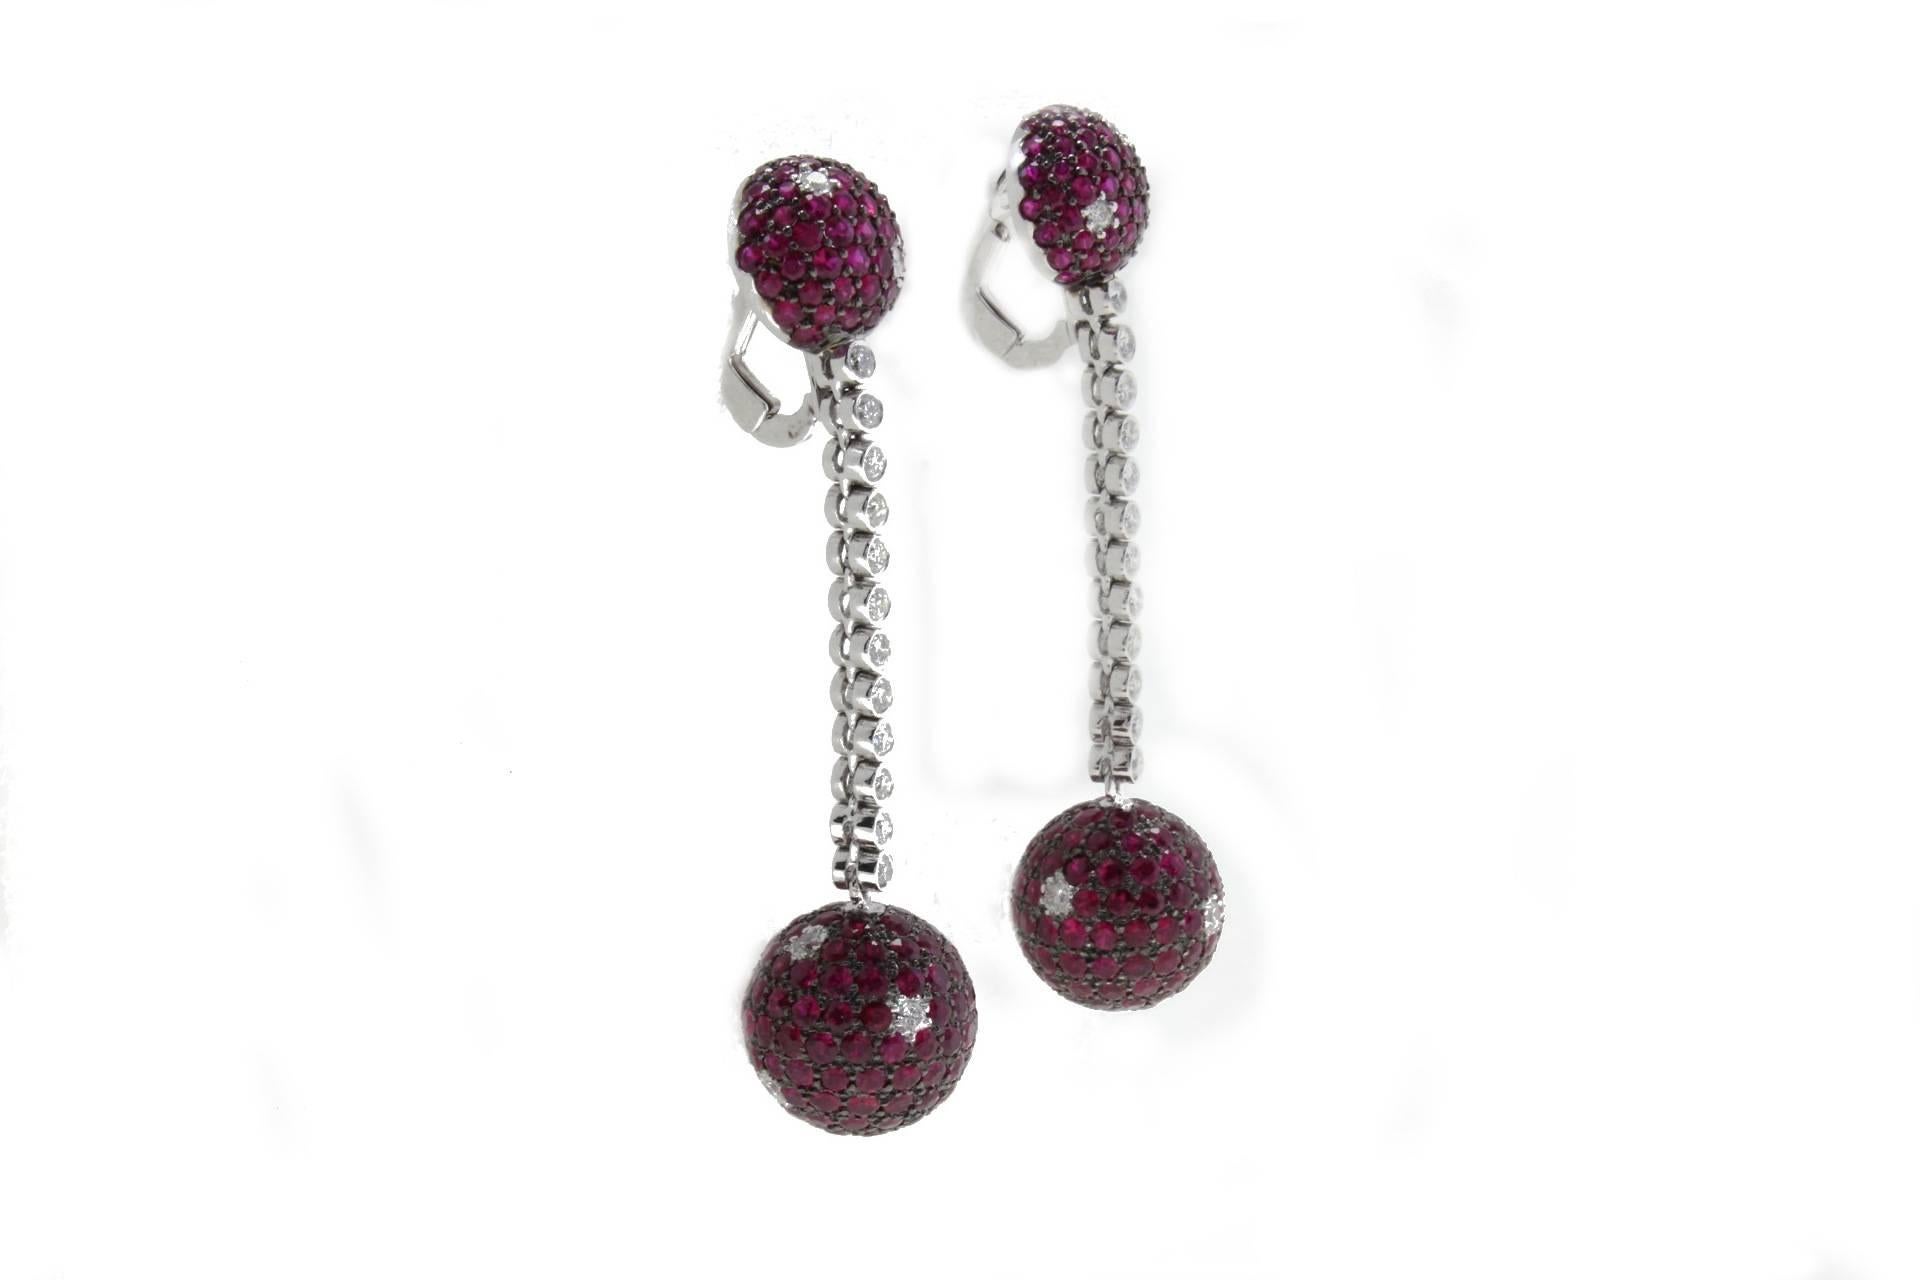 Dangle earrings18kt white gold mounted with diamonds lines that link two balls covered in rubies and diamonds.

Diamonds 1.24 kt
Rubies 11.41 kt
Tot.Weight 14.70 gr
R.F icoh